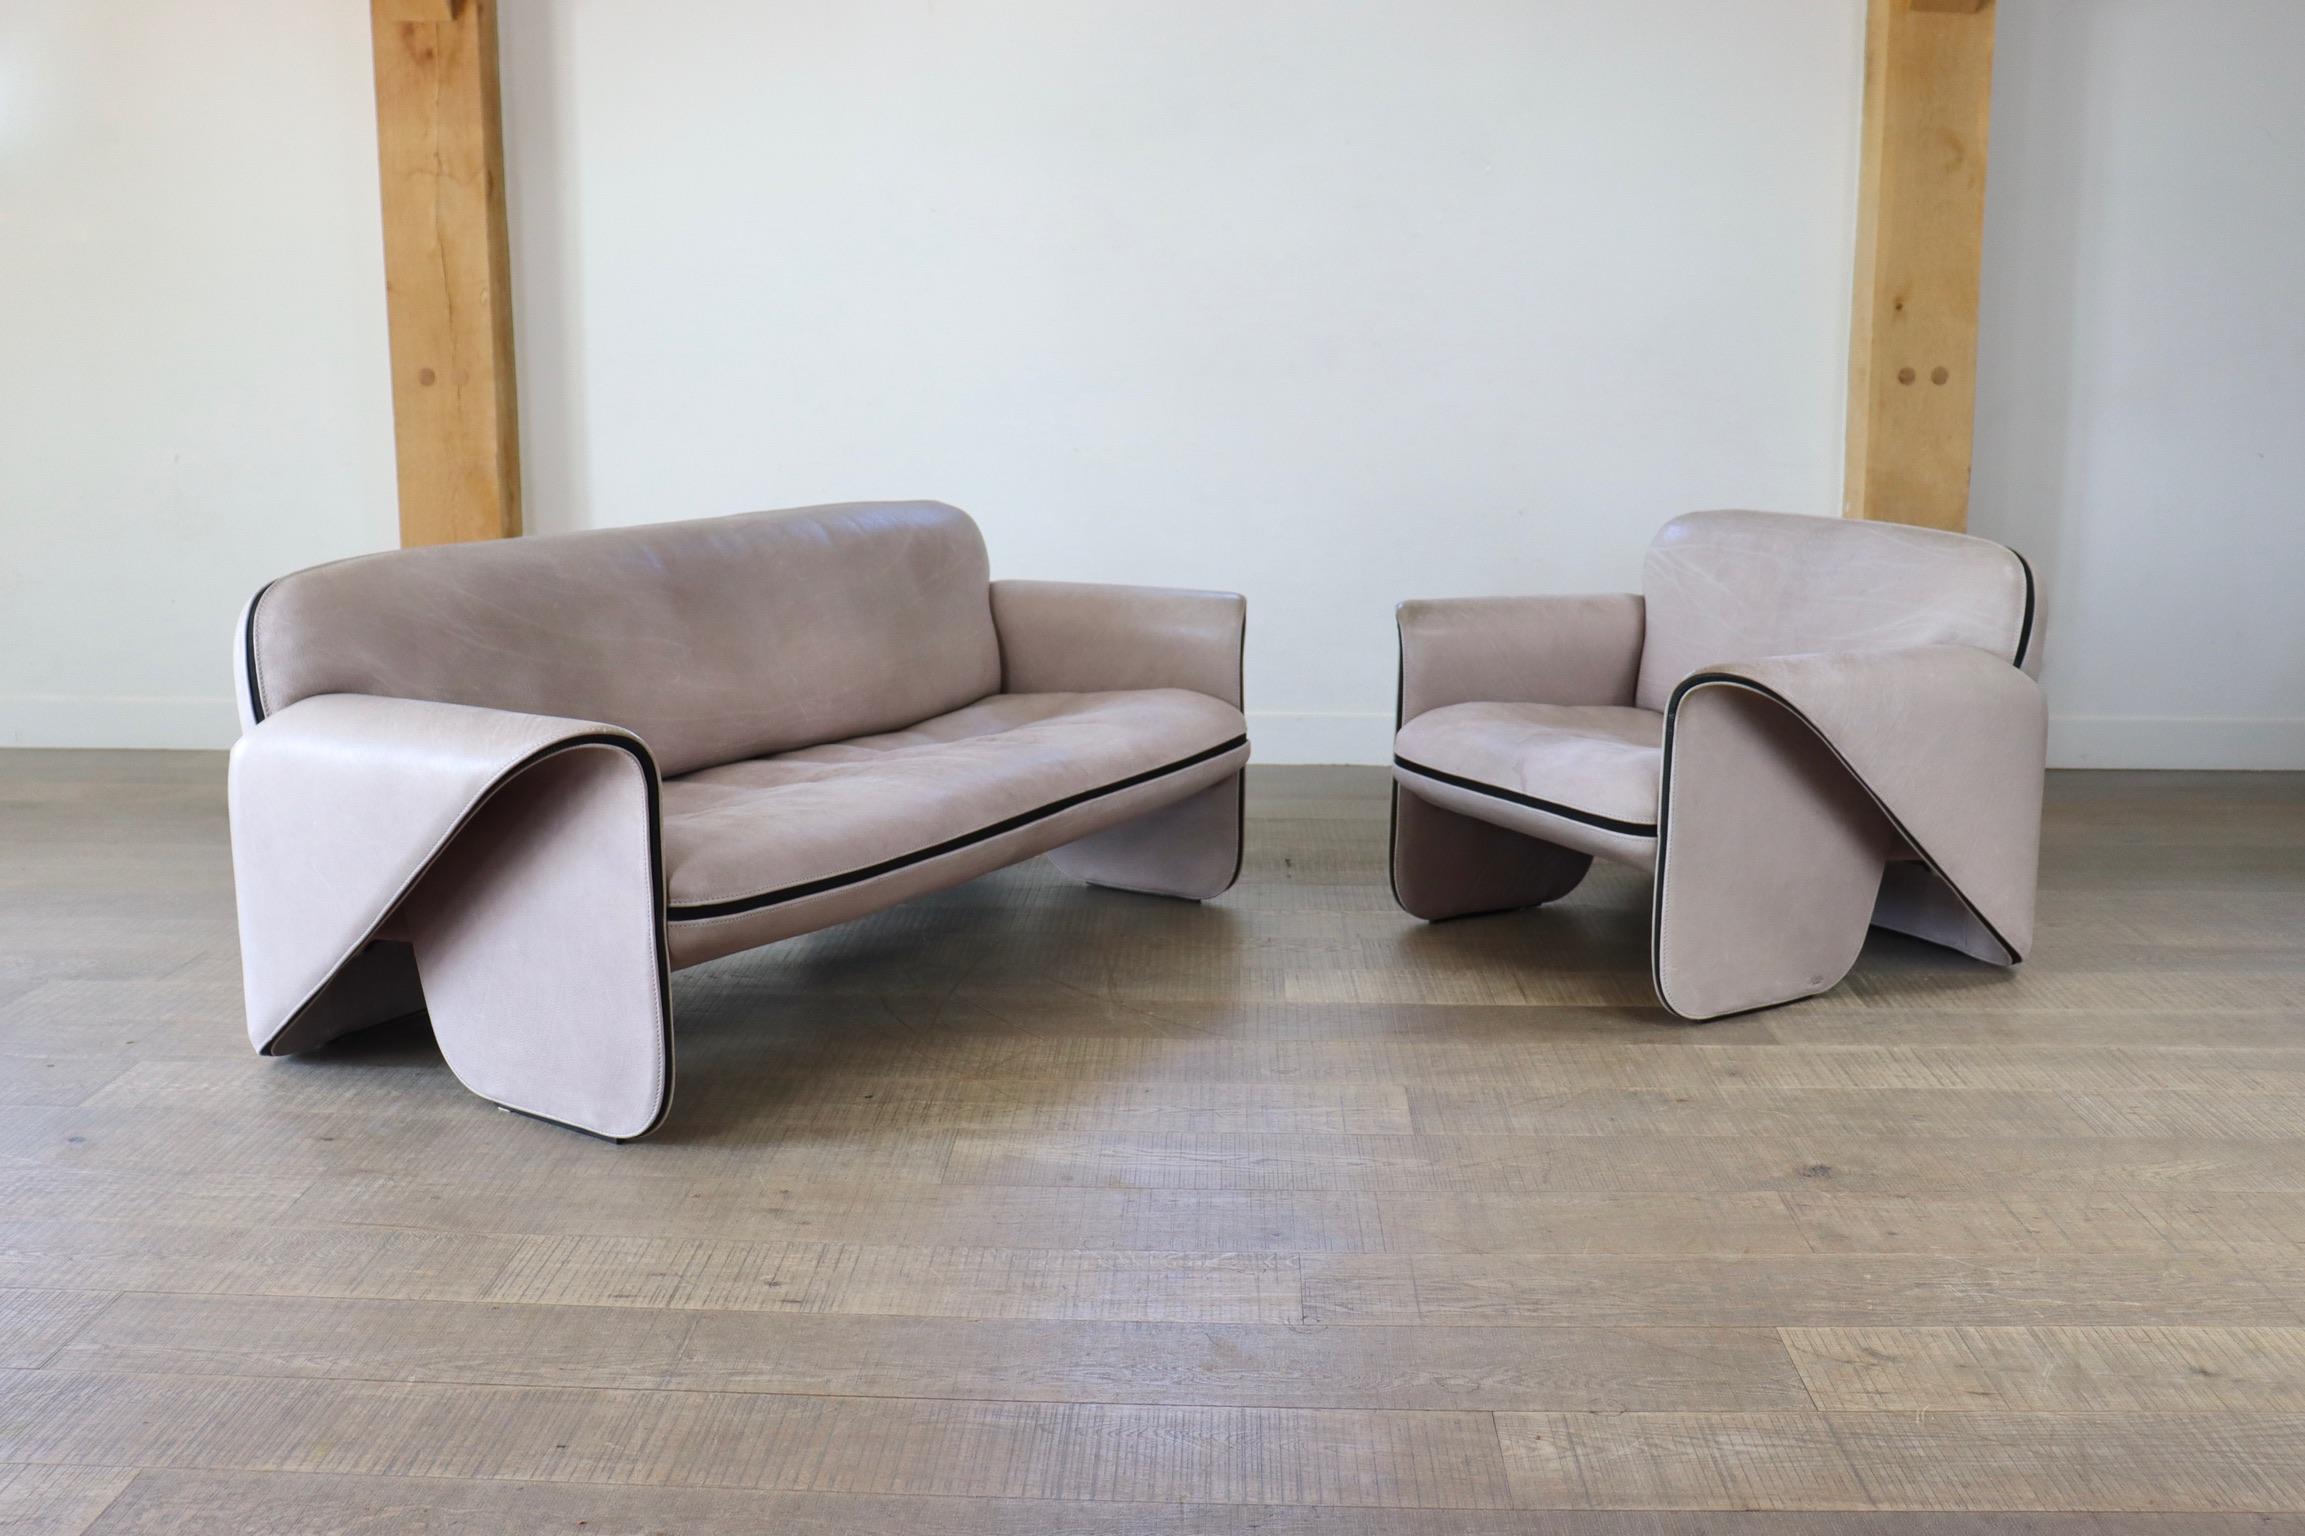 Rare three seat sofa and lounge chair by De Sede, designed by Gerd Lange in the 80s. De Sede is known for its use of only the highest quality leather. This set is upholstered in thick elephant grey buffalo leather. 

Dimensions: 
Sofa: W175 x D80